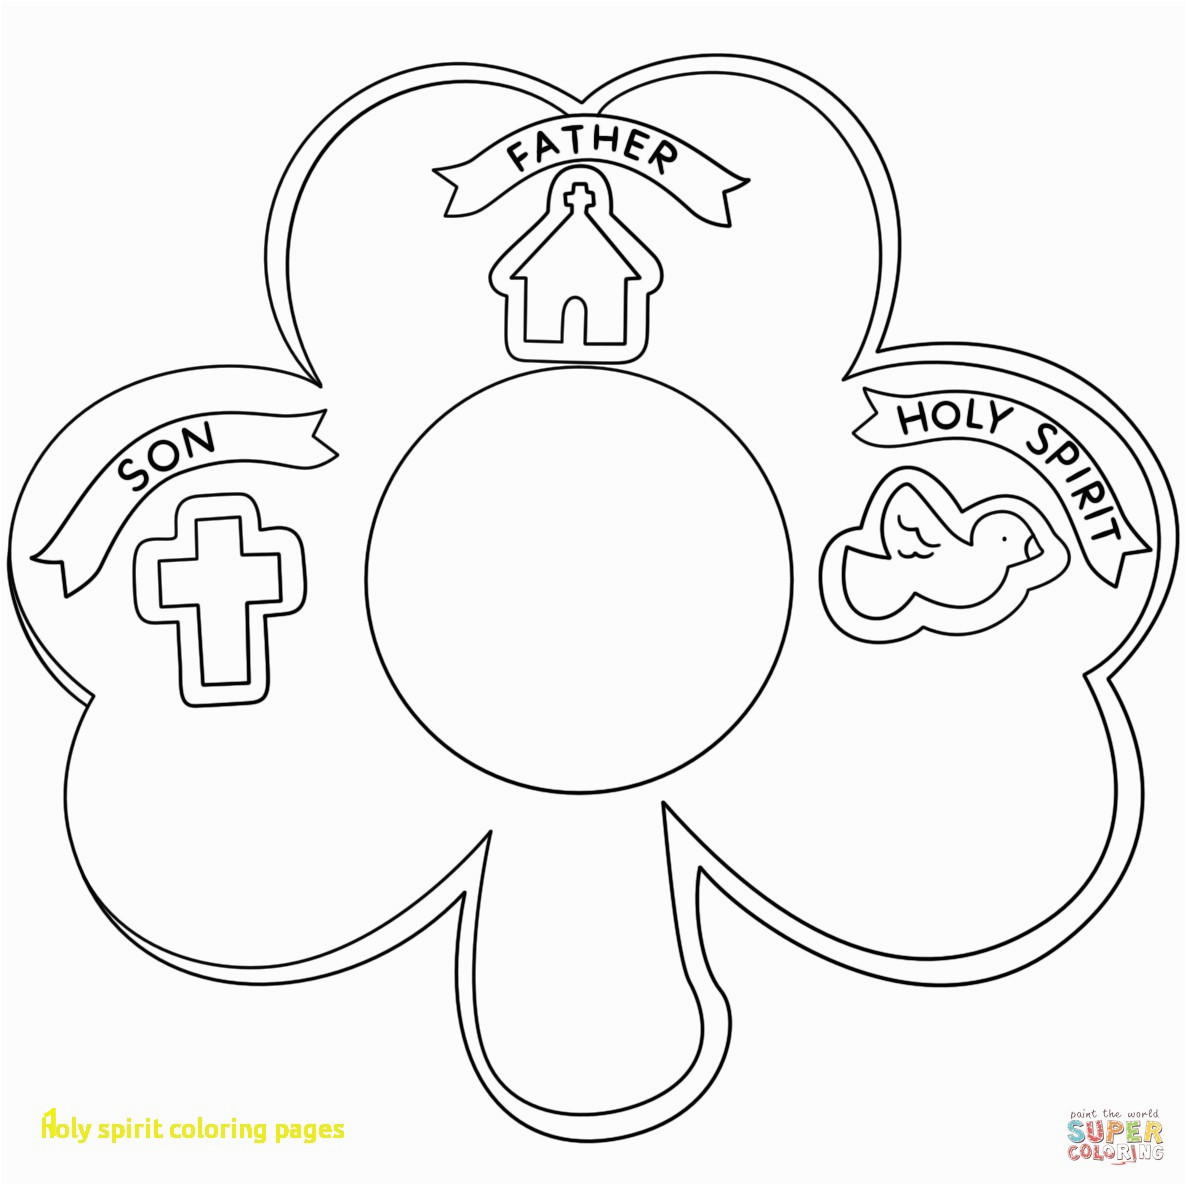 Free Printable Holy Spirit Coloring Pages Holy Spirit Coloring Page at Getcolorings